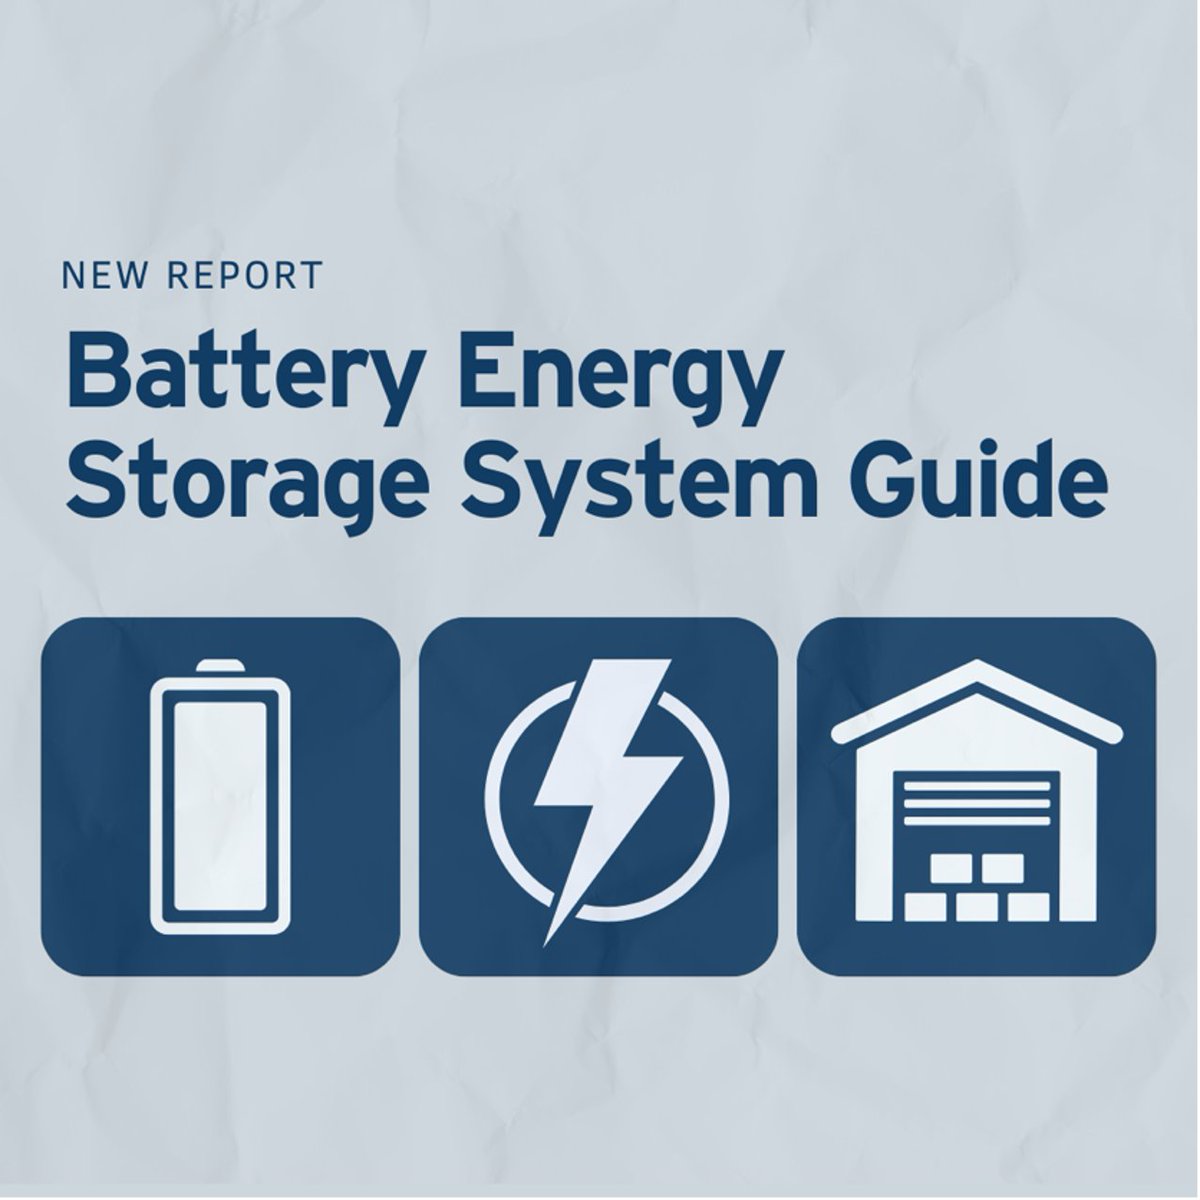 Little changes make a big impact 🌟Learn how Battery Energy Storage Systems (#BESS) can revolutionize our energy habits in our easy-to-follow guide: bit.ly/3uAQDzh  

#EnergyStorage #BESS #CleanTech